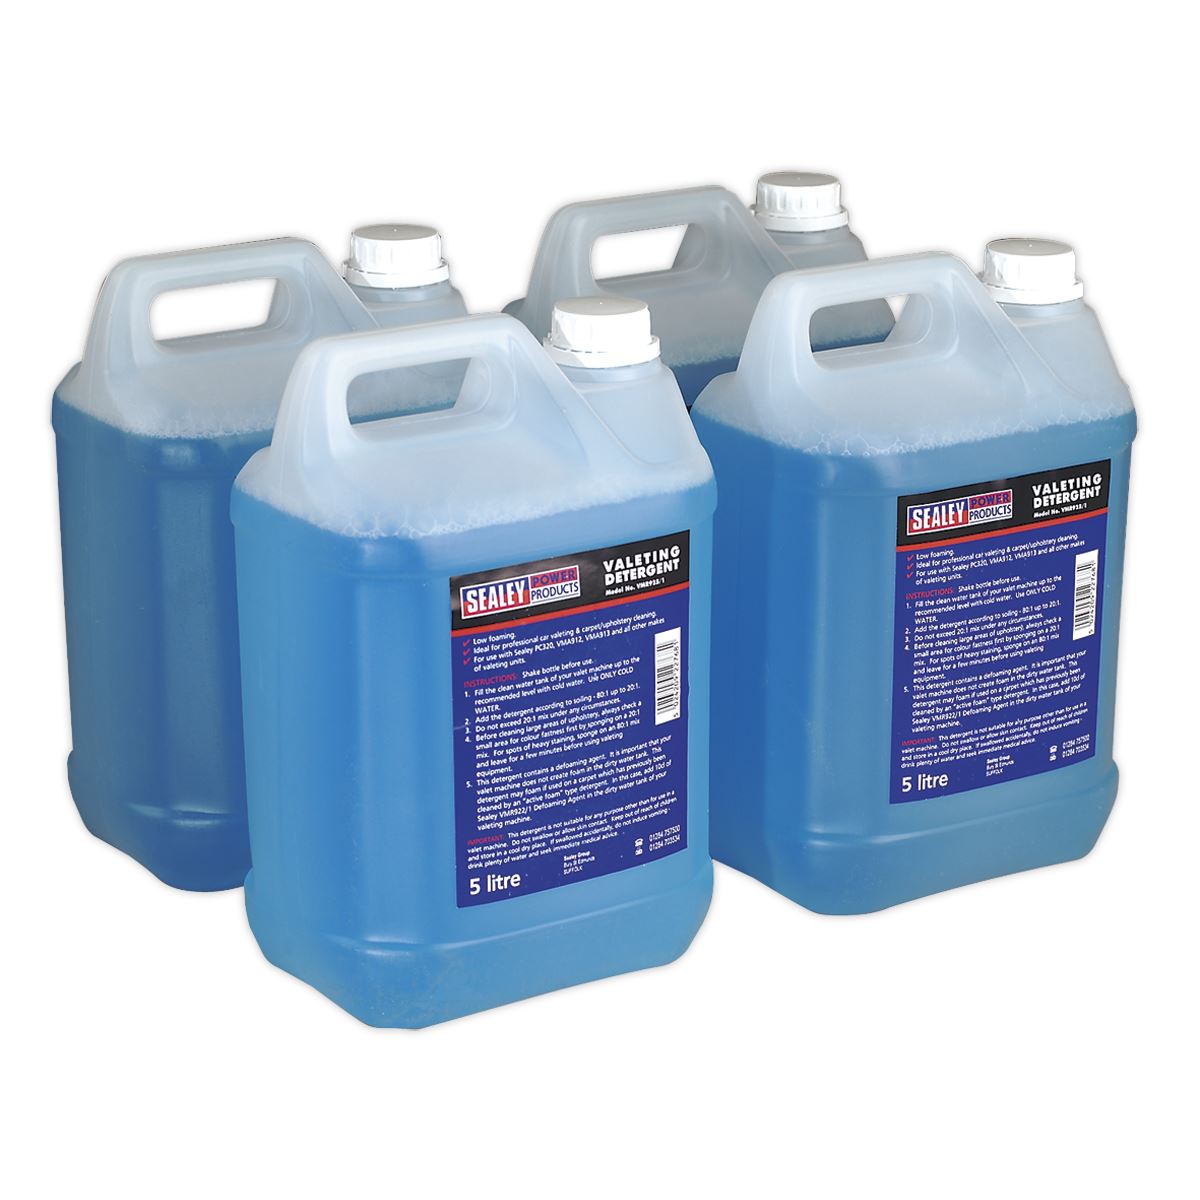 Sealey Carpet/Upholstery Detergent 5L Pack of 4